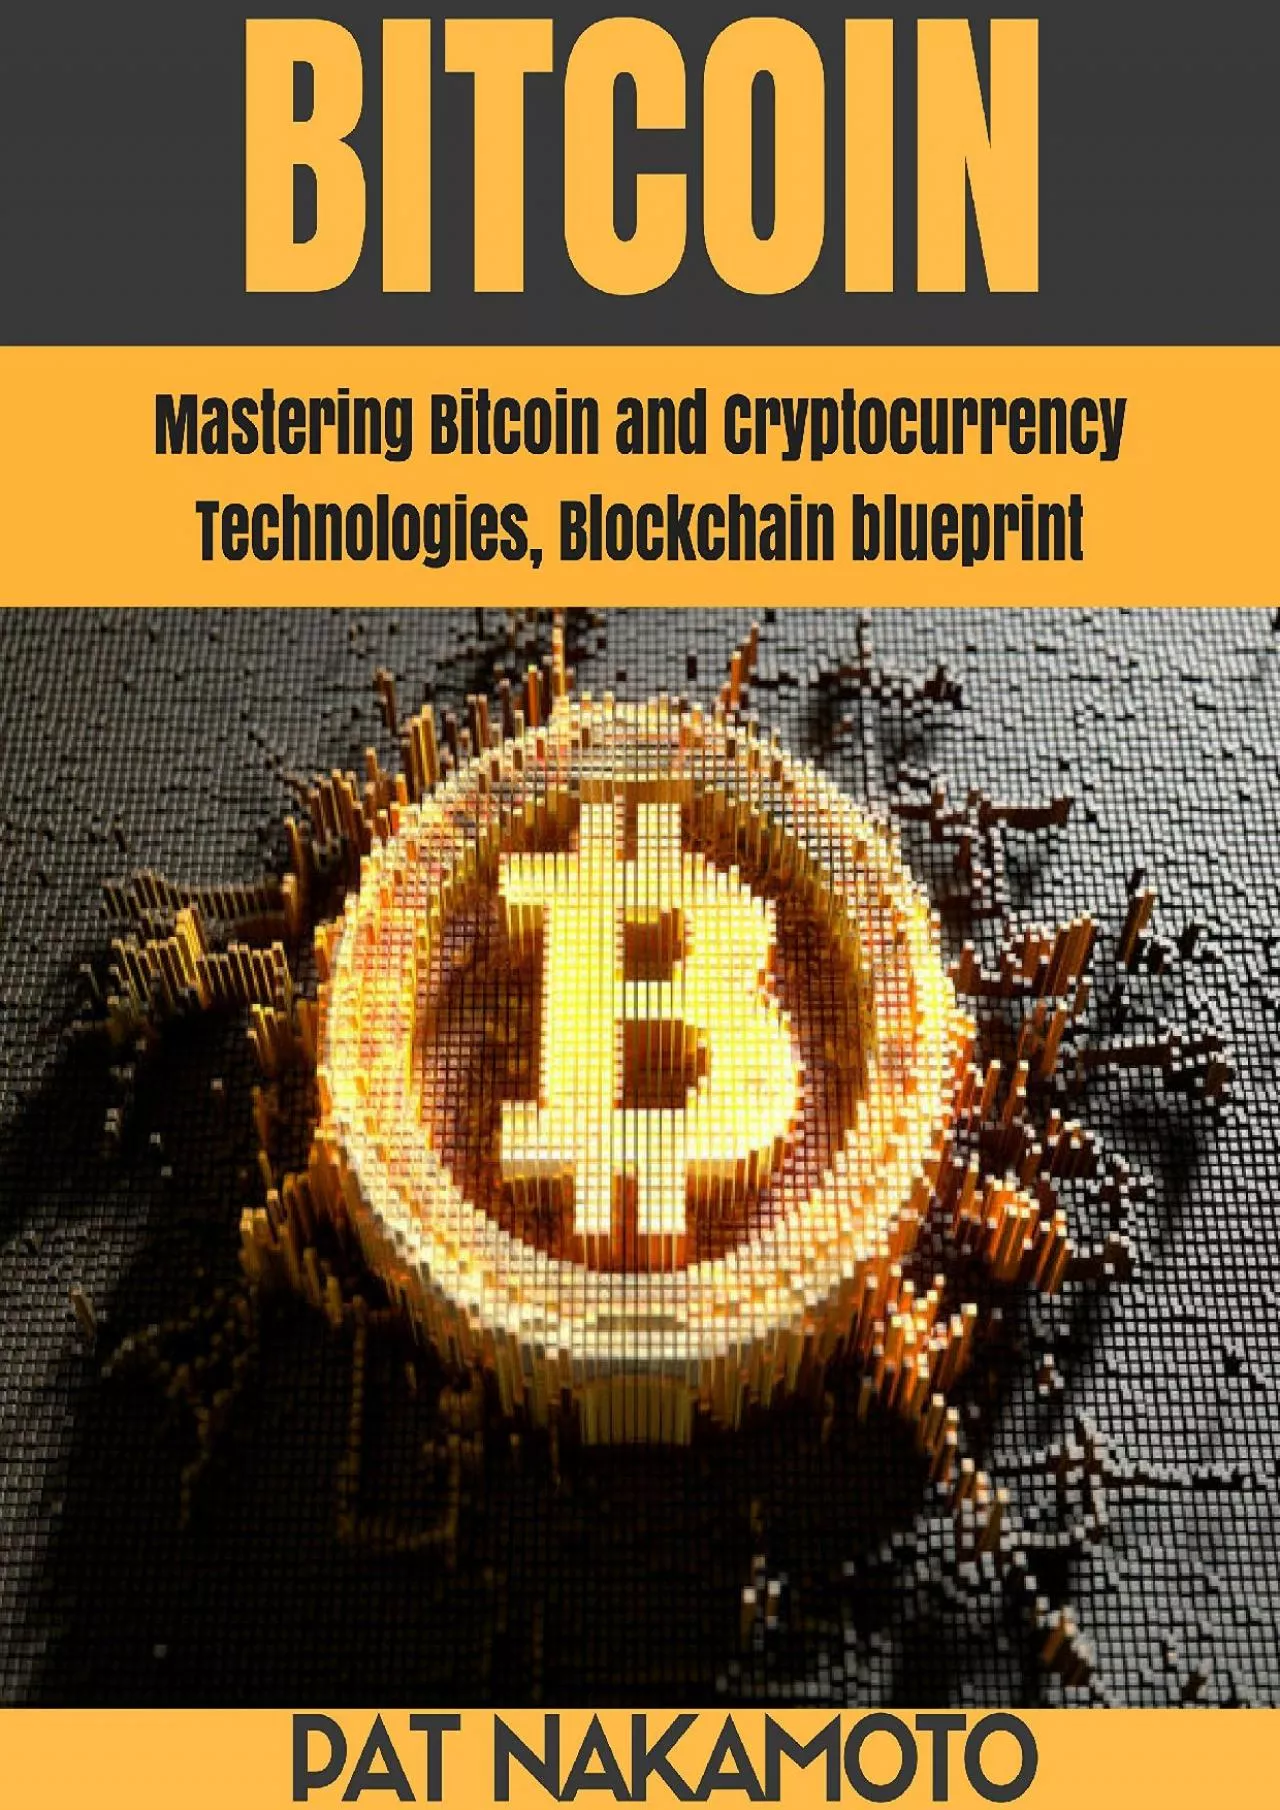 (DOWNLOAD)-BITCOIN: Mastering Bitcoin and Cryptocurrency Technologies, Blockchain blueprint